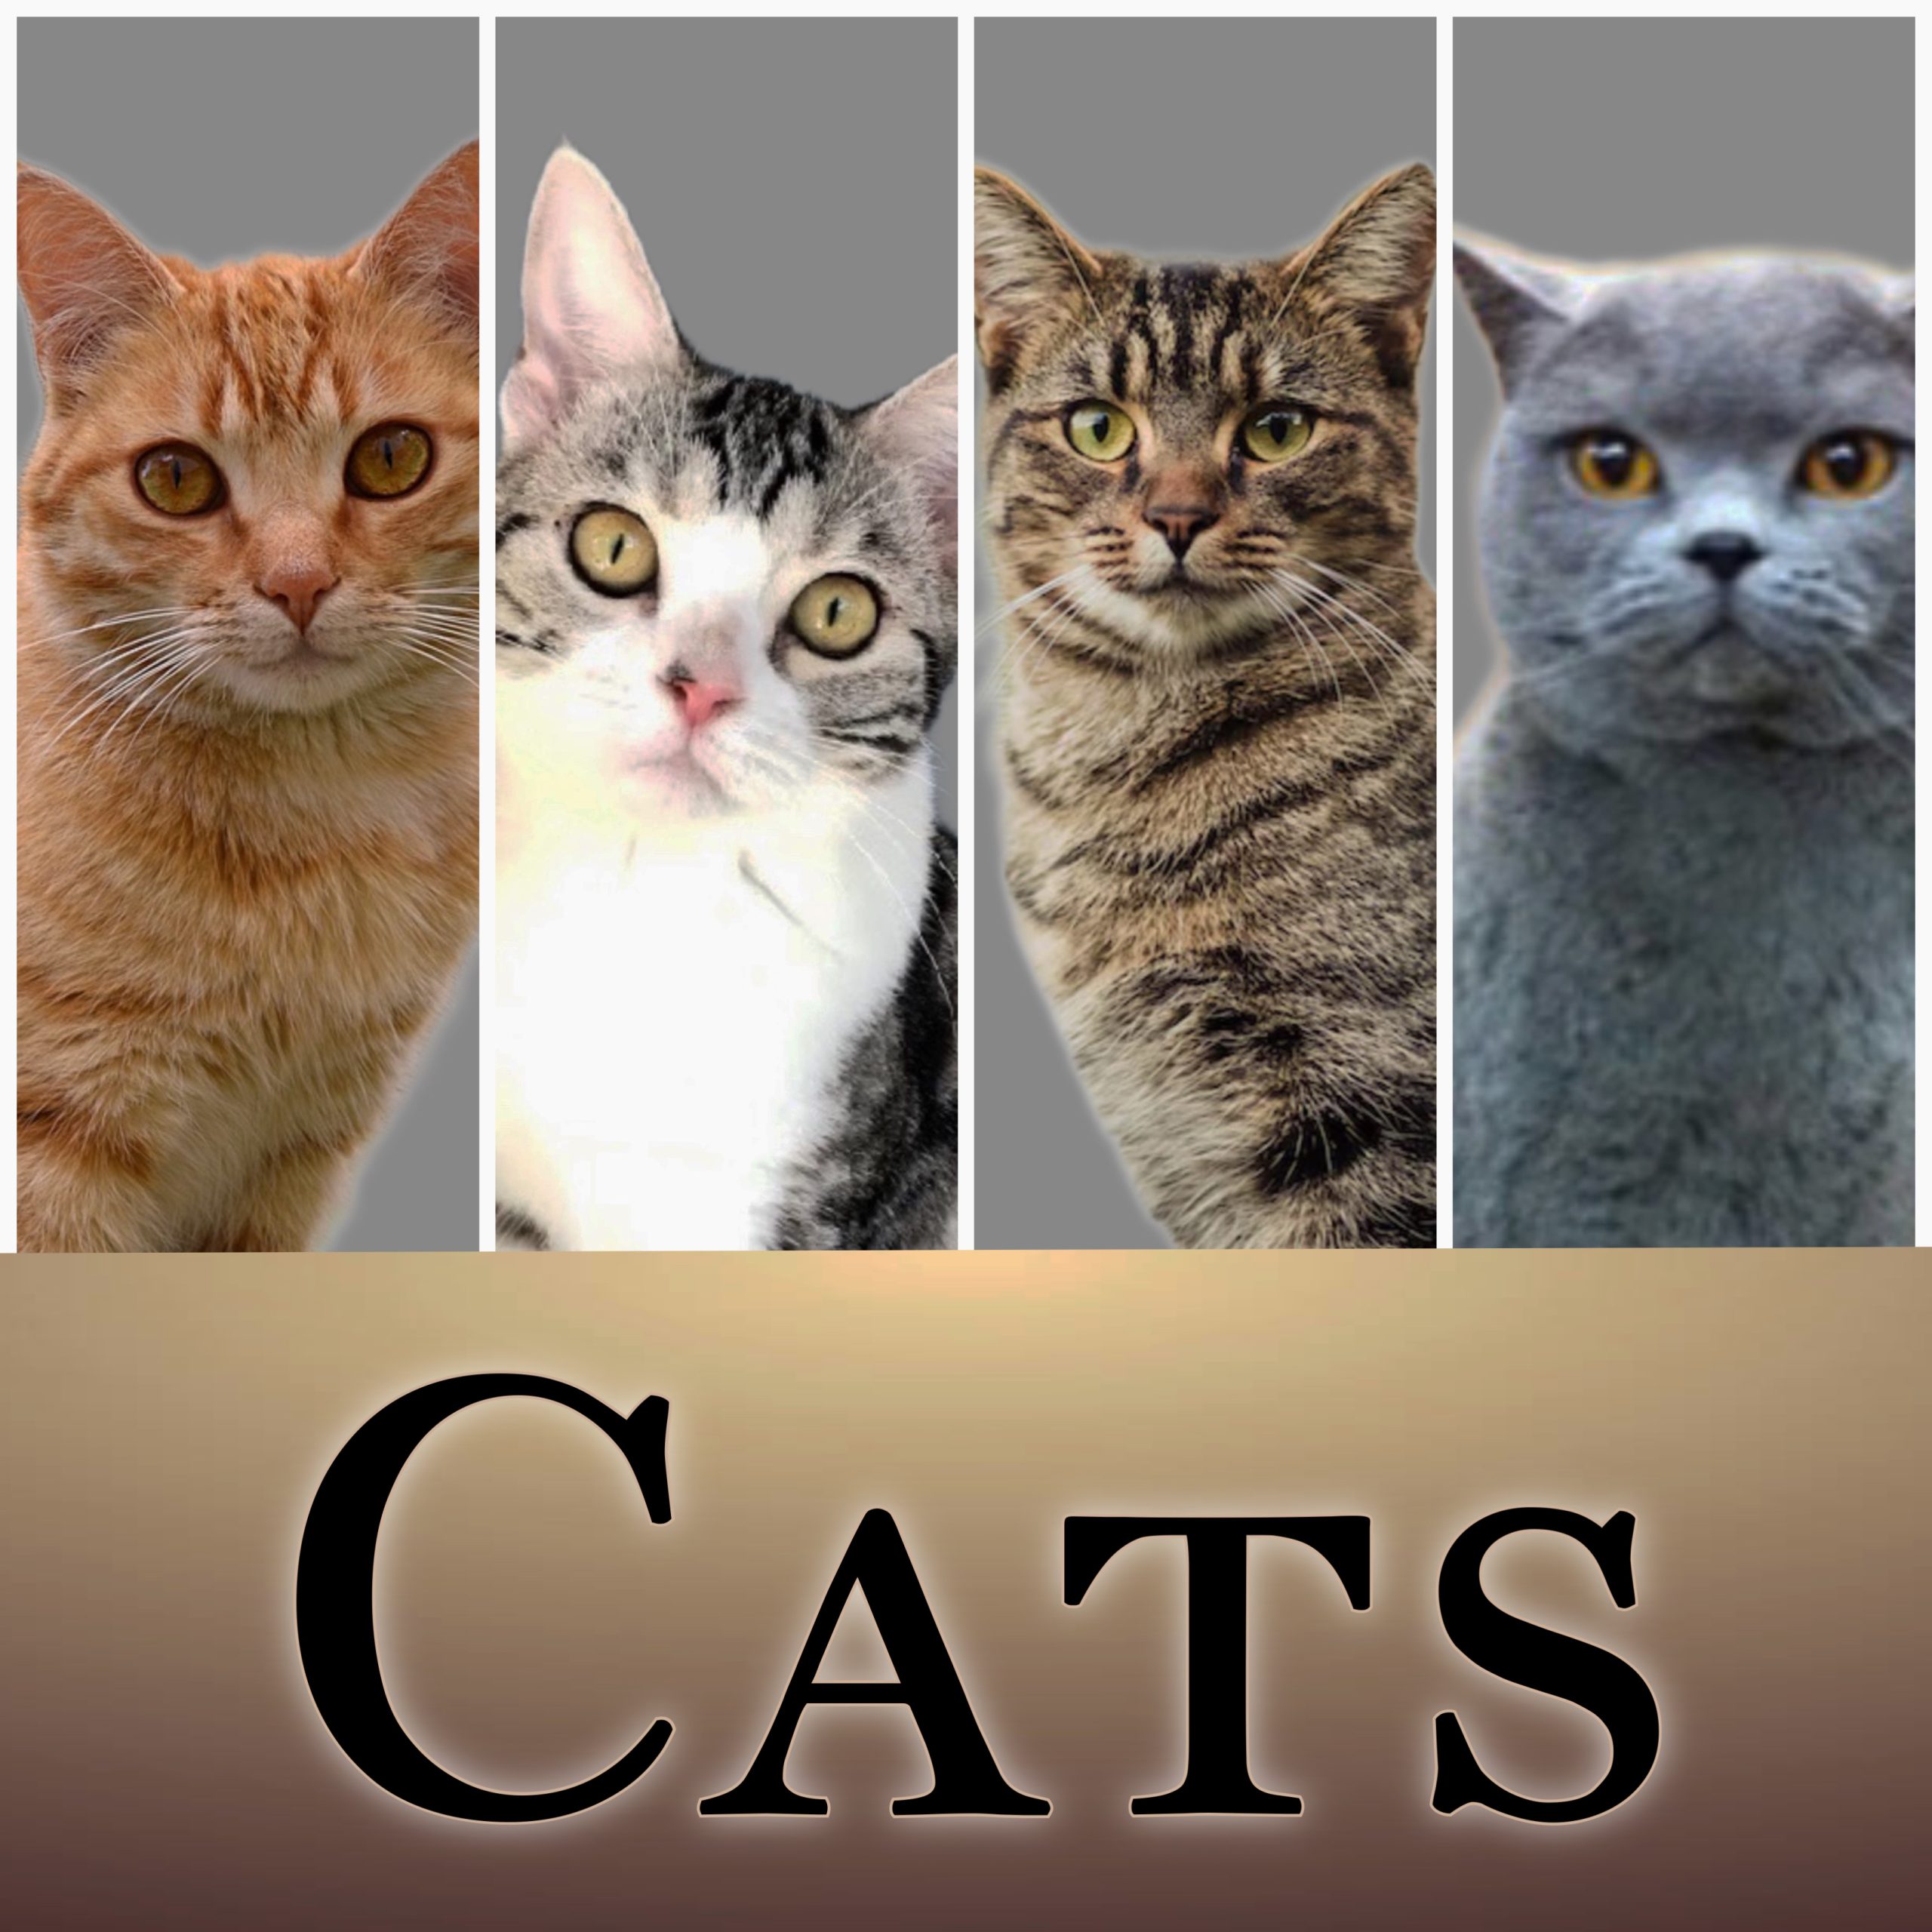 A graphic representing trained cats & cat trainers that are available to hire for movies, TV and print. There is an orange tabby, a silver tabby, a brown tabby and a grey cat. The text reads "CATS". Click to hire a cat actor.